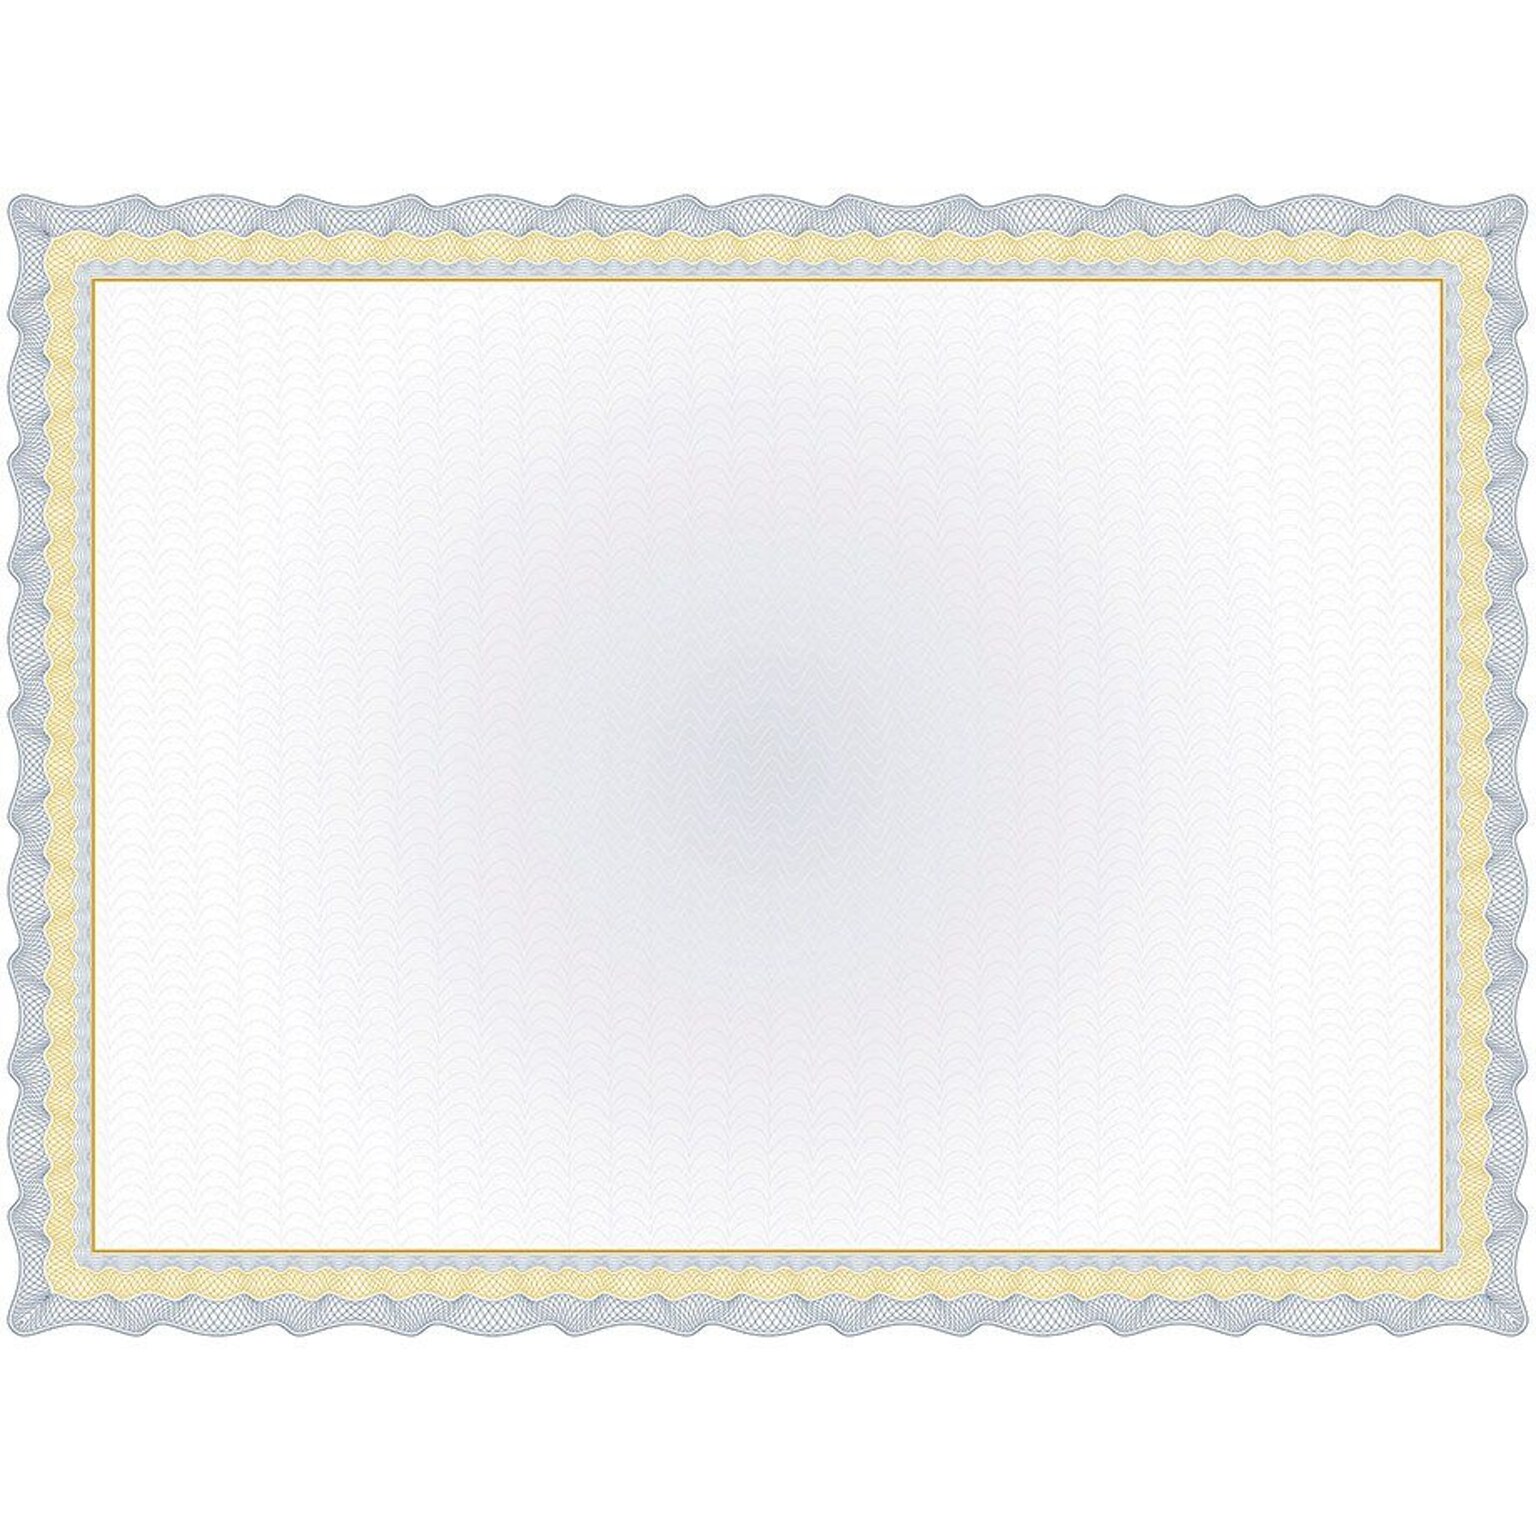 Great Papers Twisty Graph Certificates, 8.5 x 11, Navy Blue, 15/Count (2013295)